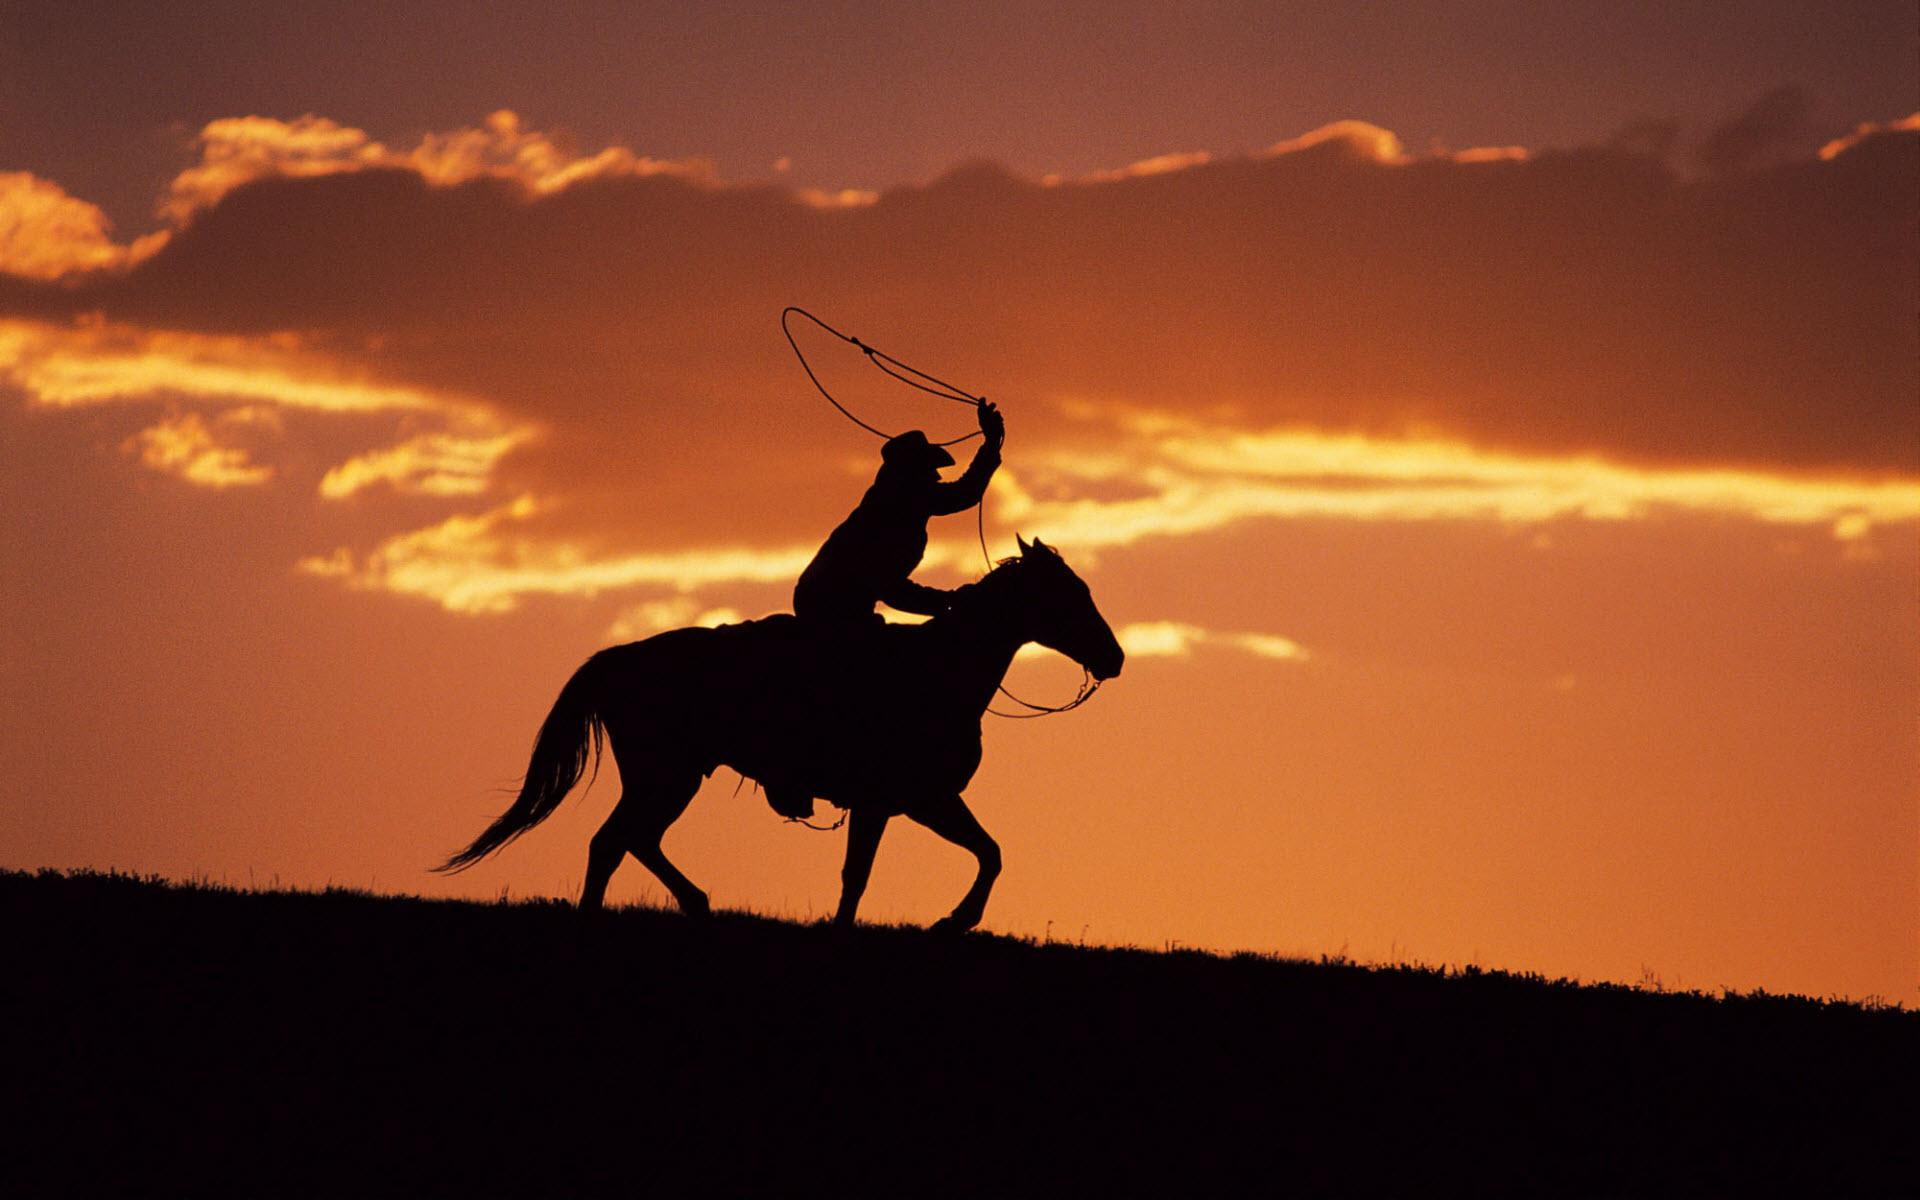 Western Cowboy at Sunset, silhouette of cowboy riding horse, others